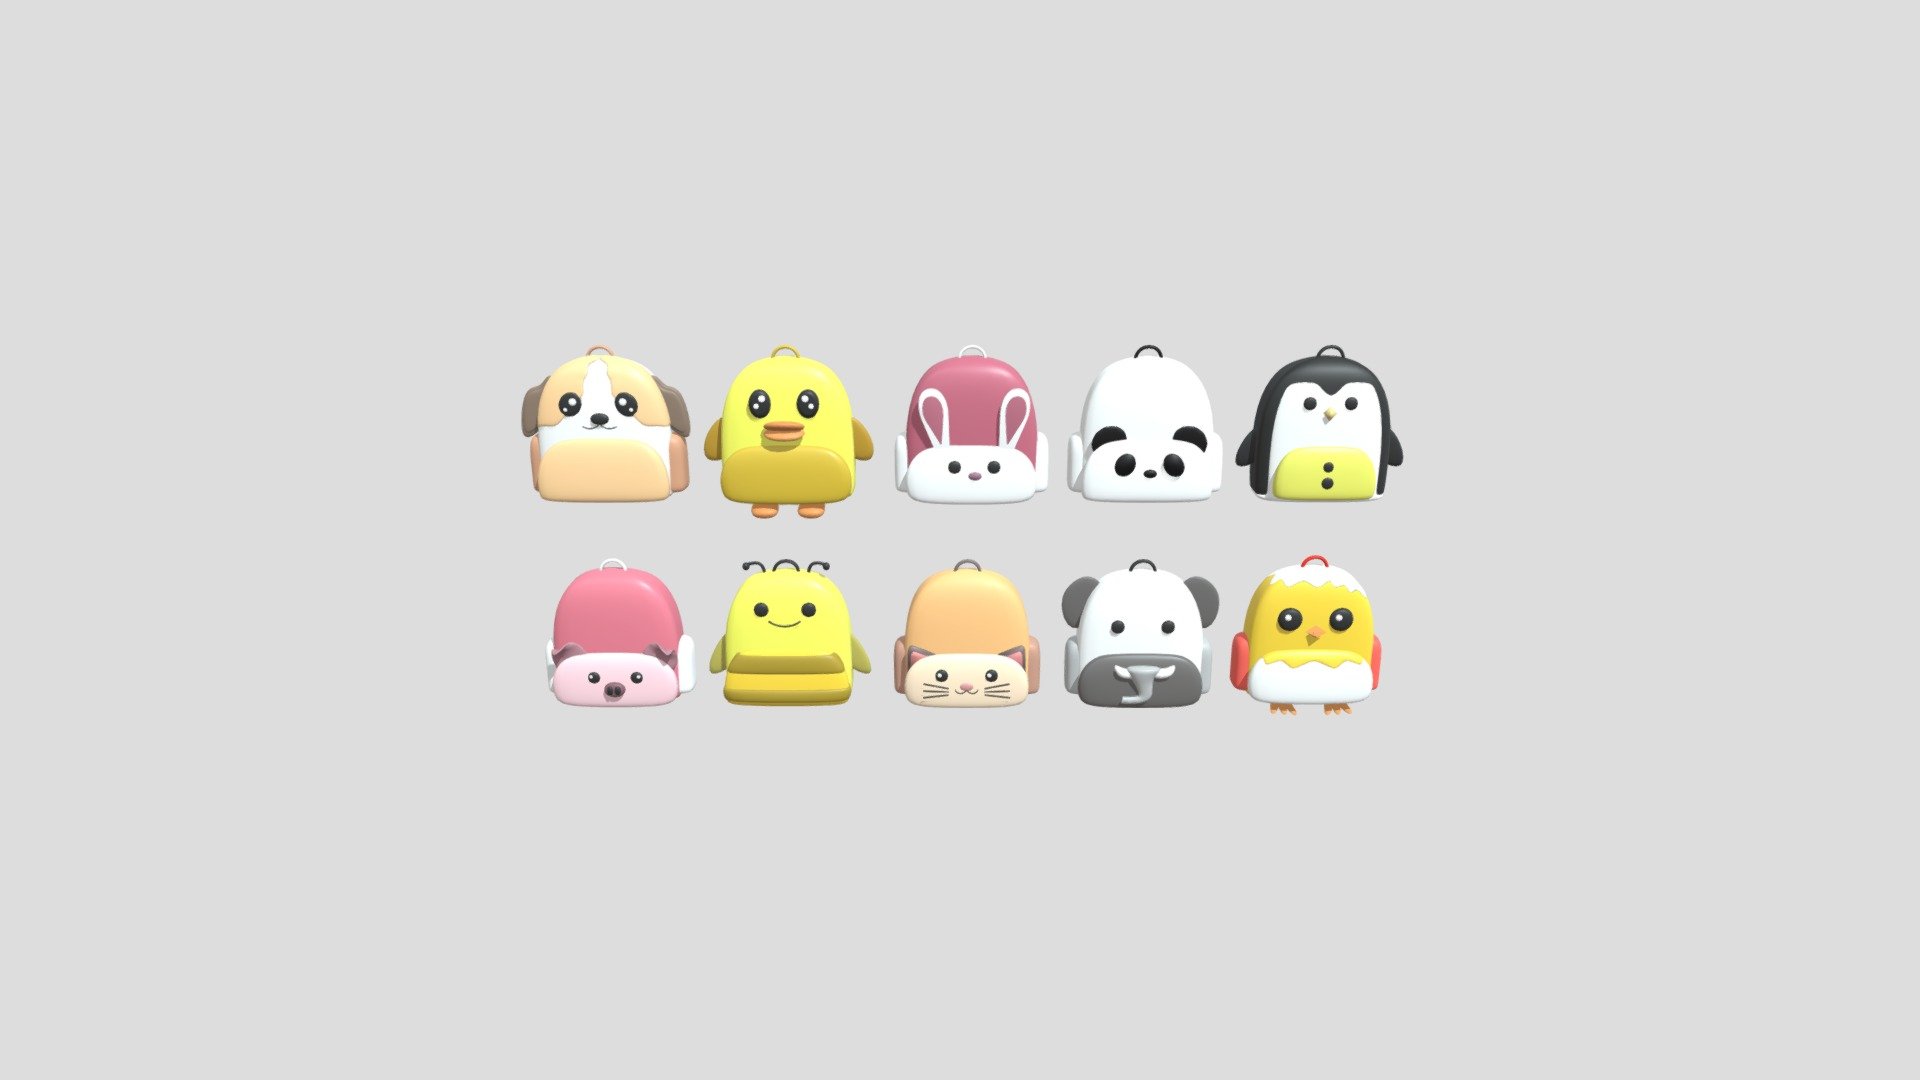 Animal bags are bags with cute animal shapes. This time I made bags in the shapes of rabbit, cat, panda, dog, duck, chicken, penguin, pig, bee, and elephant 3d model